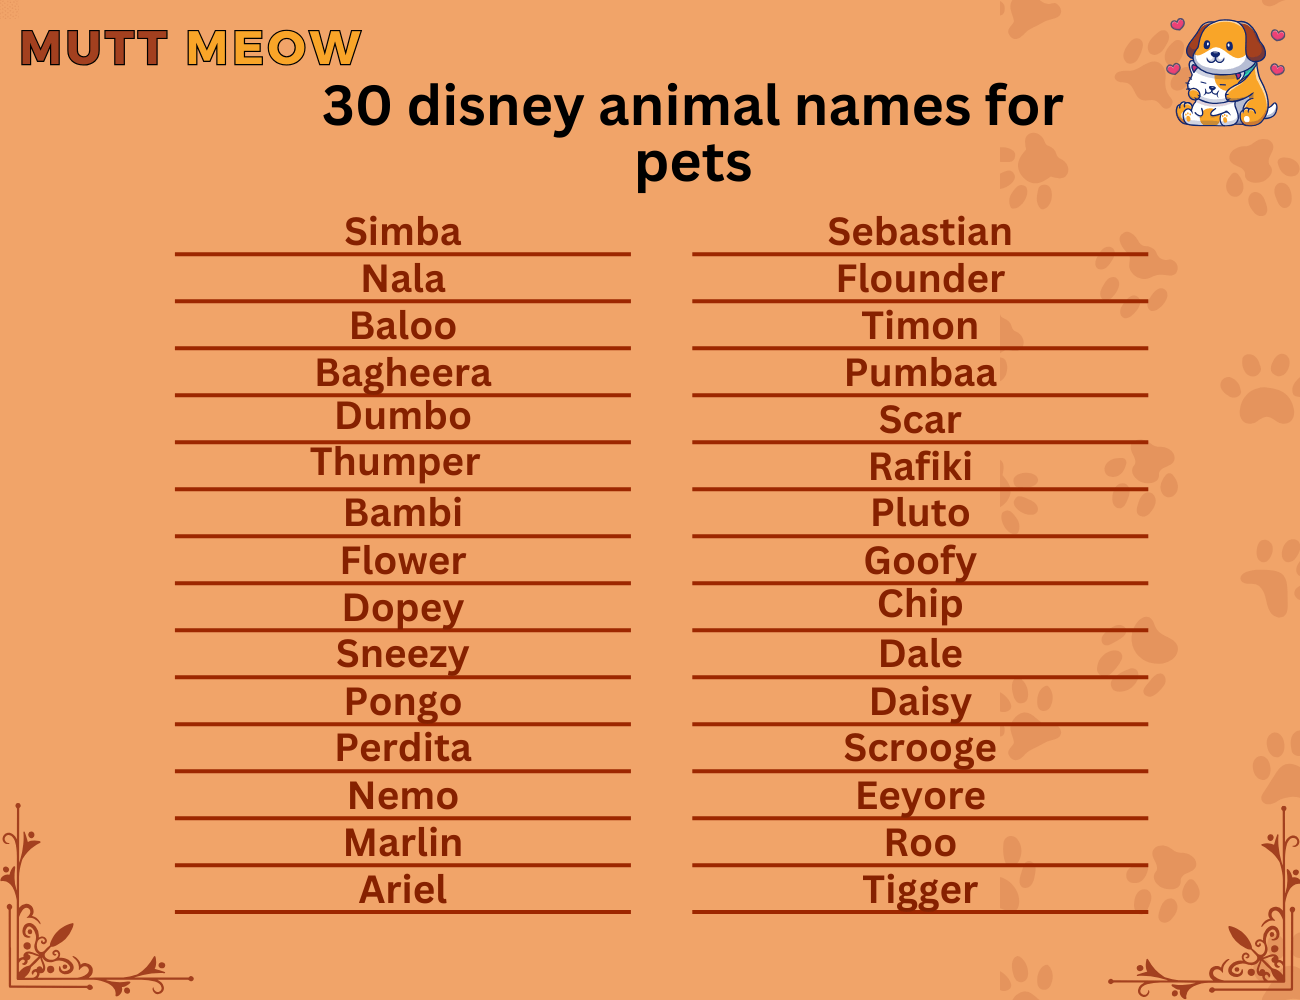 30 Disney Animal Names For Pets - Mutt Meow